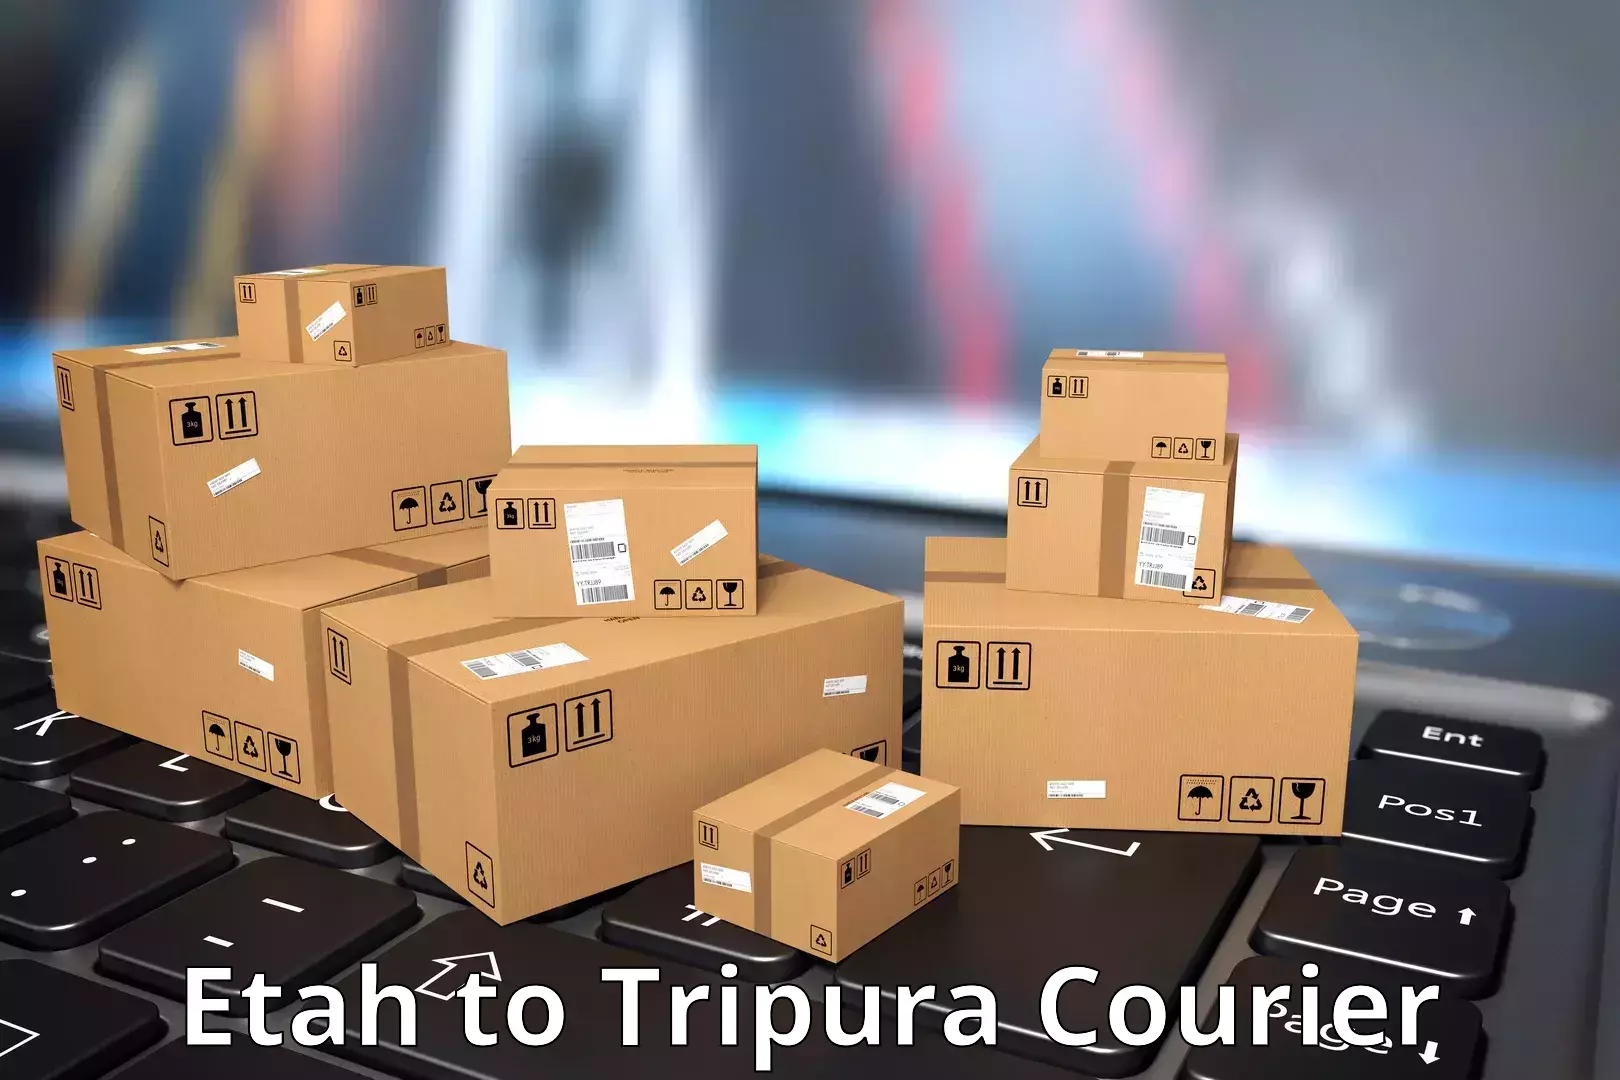 Same-day delivery options Etah to Udaipur Tripura